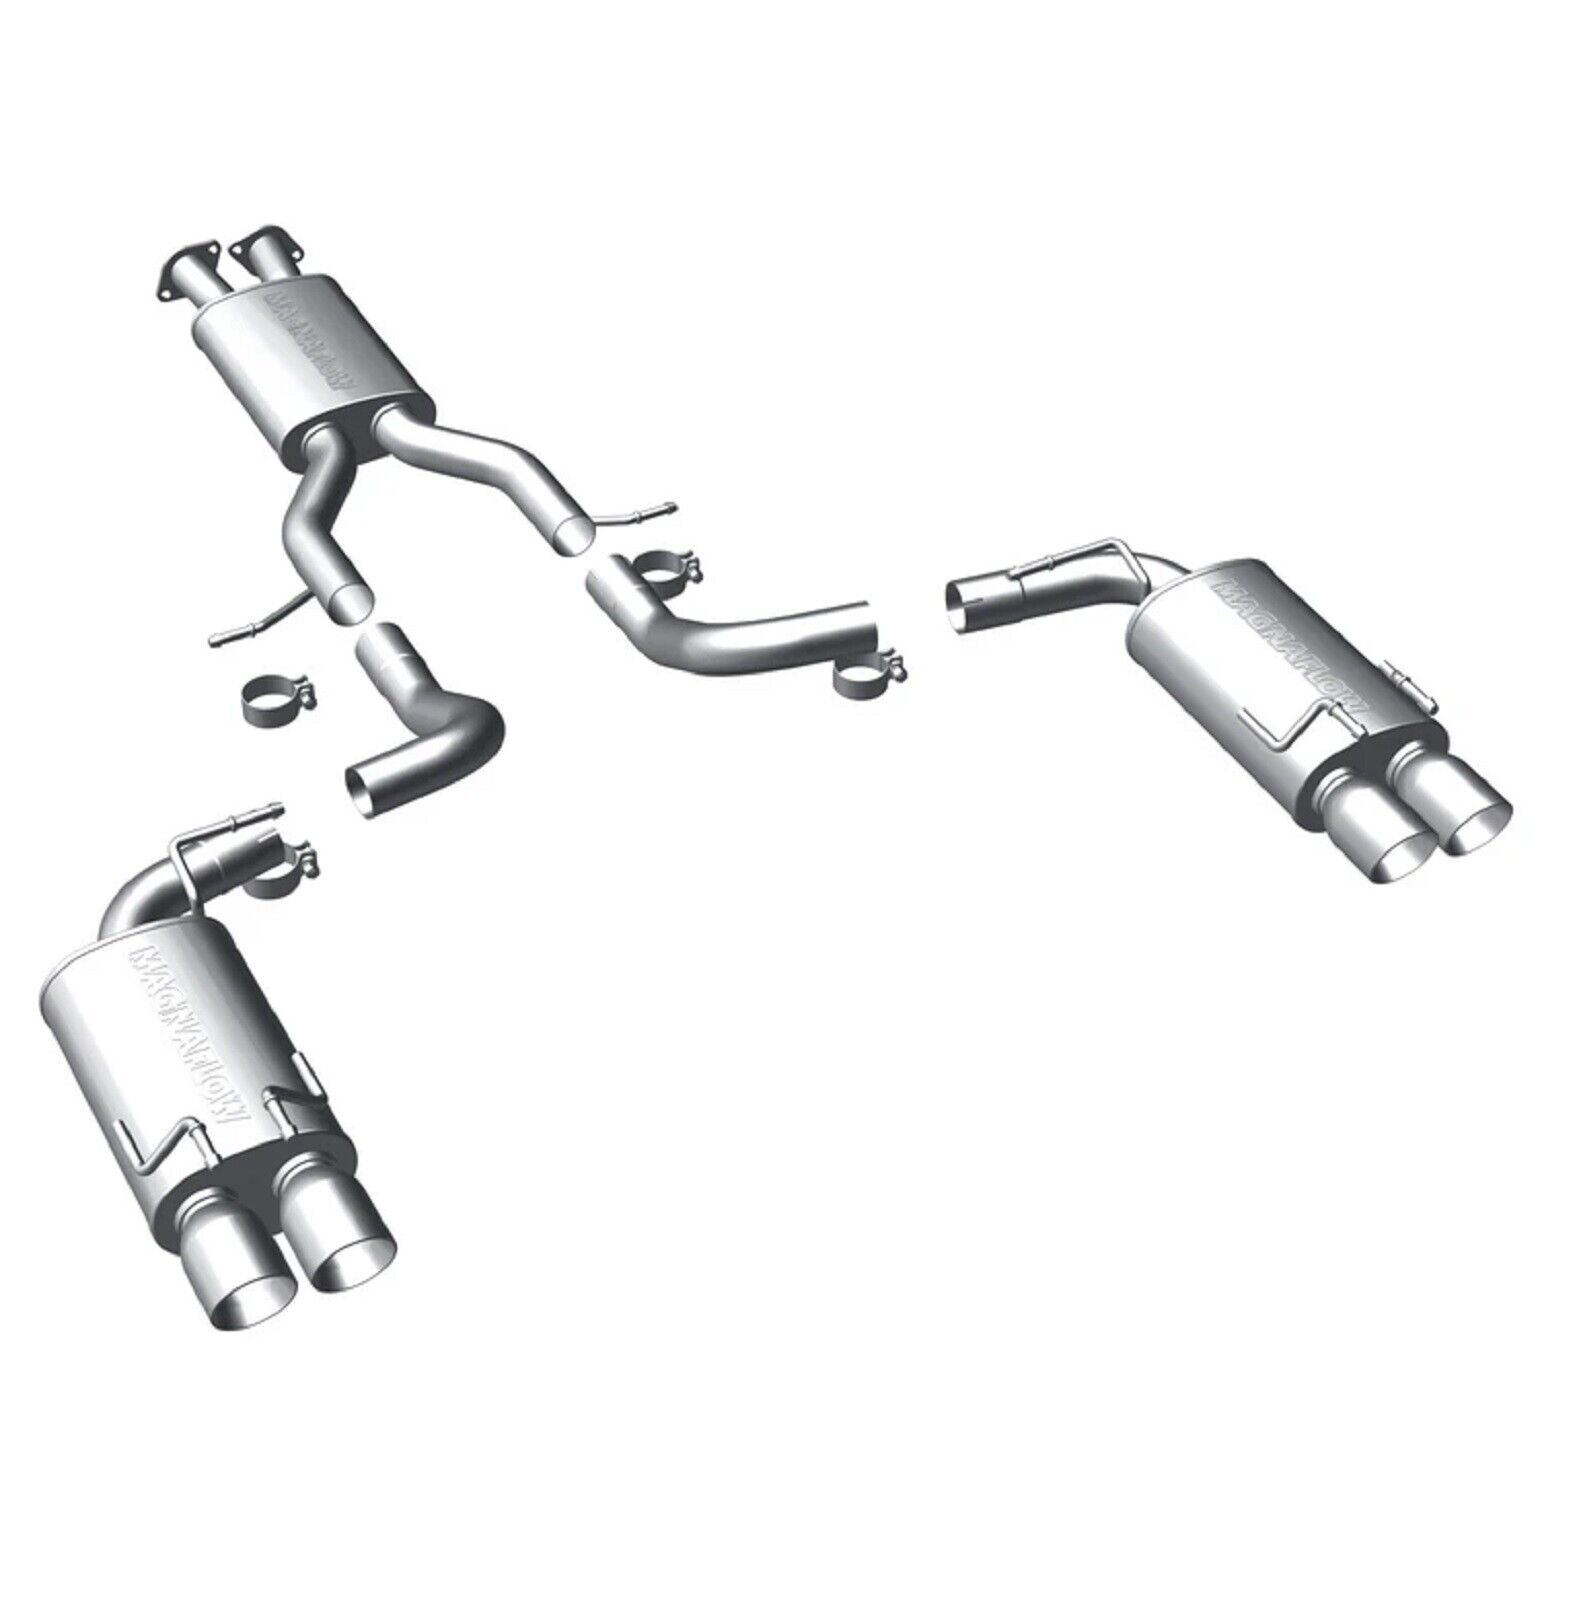 MAGNAFLOW 16766 Stainless Steel Cat-Back Exhaust Kit For 90-95 300ZX 3.0L